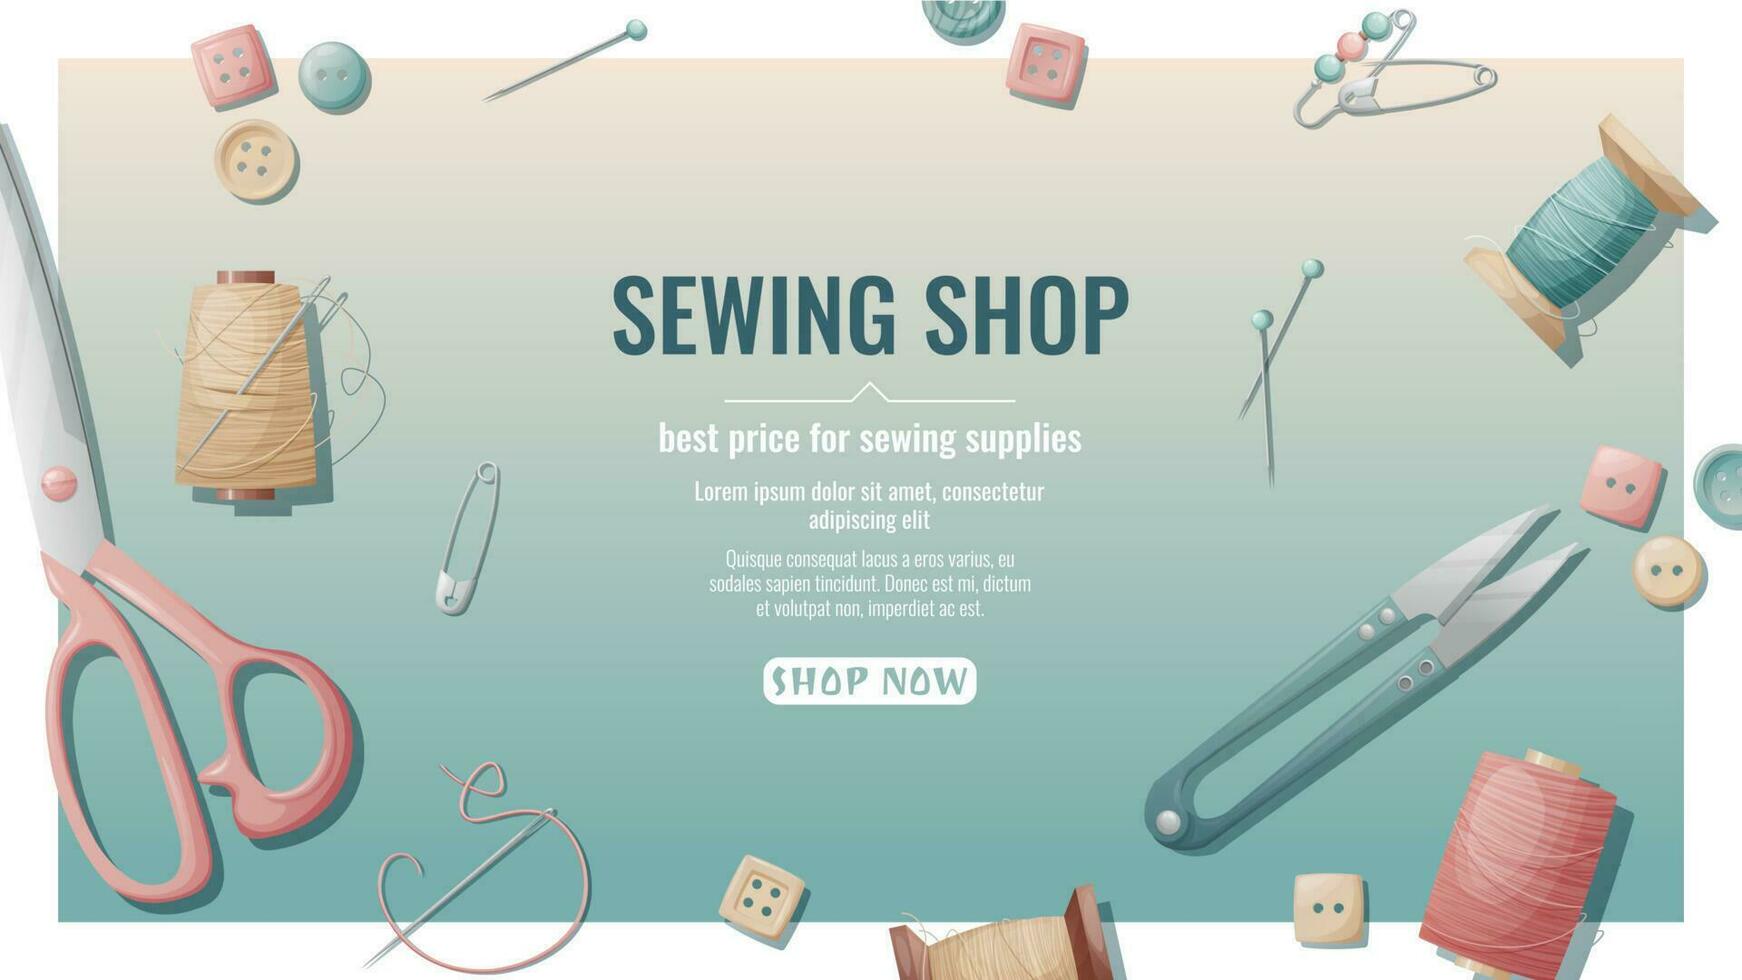 Sewing shop banner with seamstress working tools. Threads, scissors, needles, pins located on the surface. Sewing accessories, handicraft, hobby vector